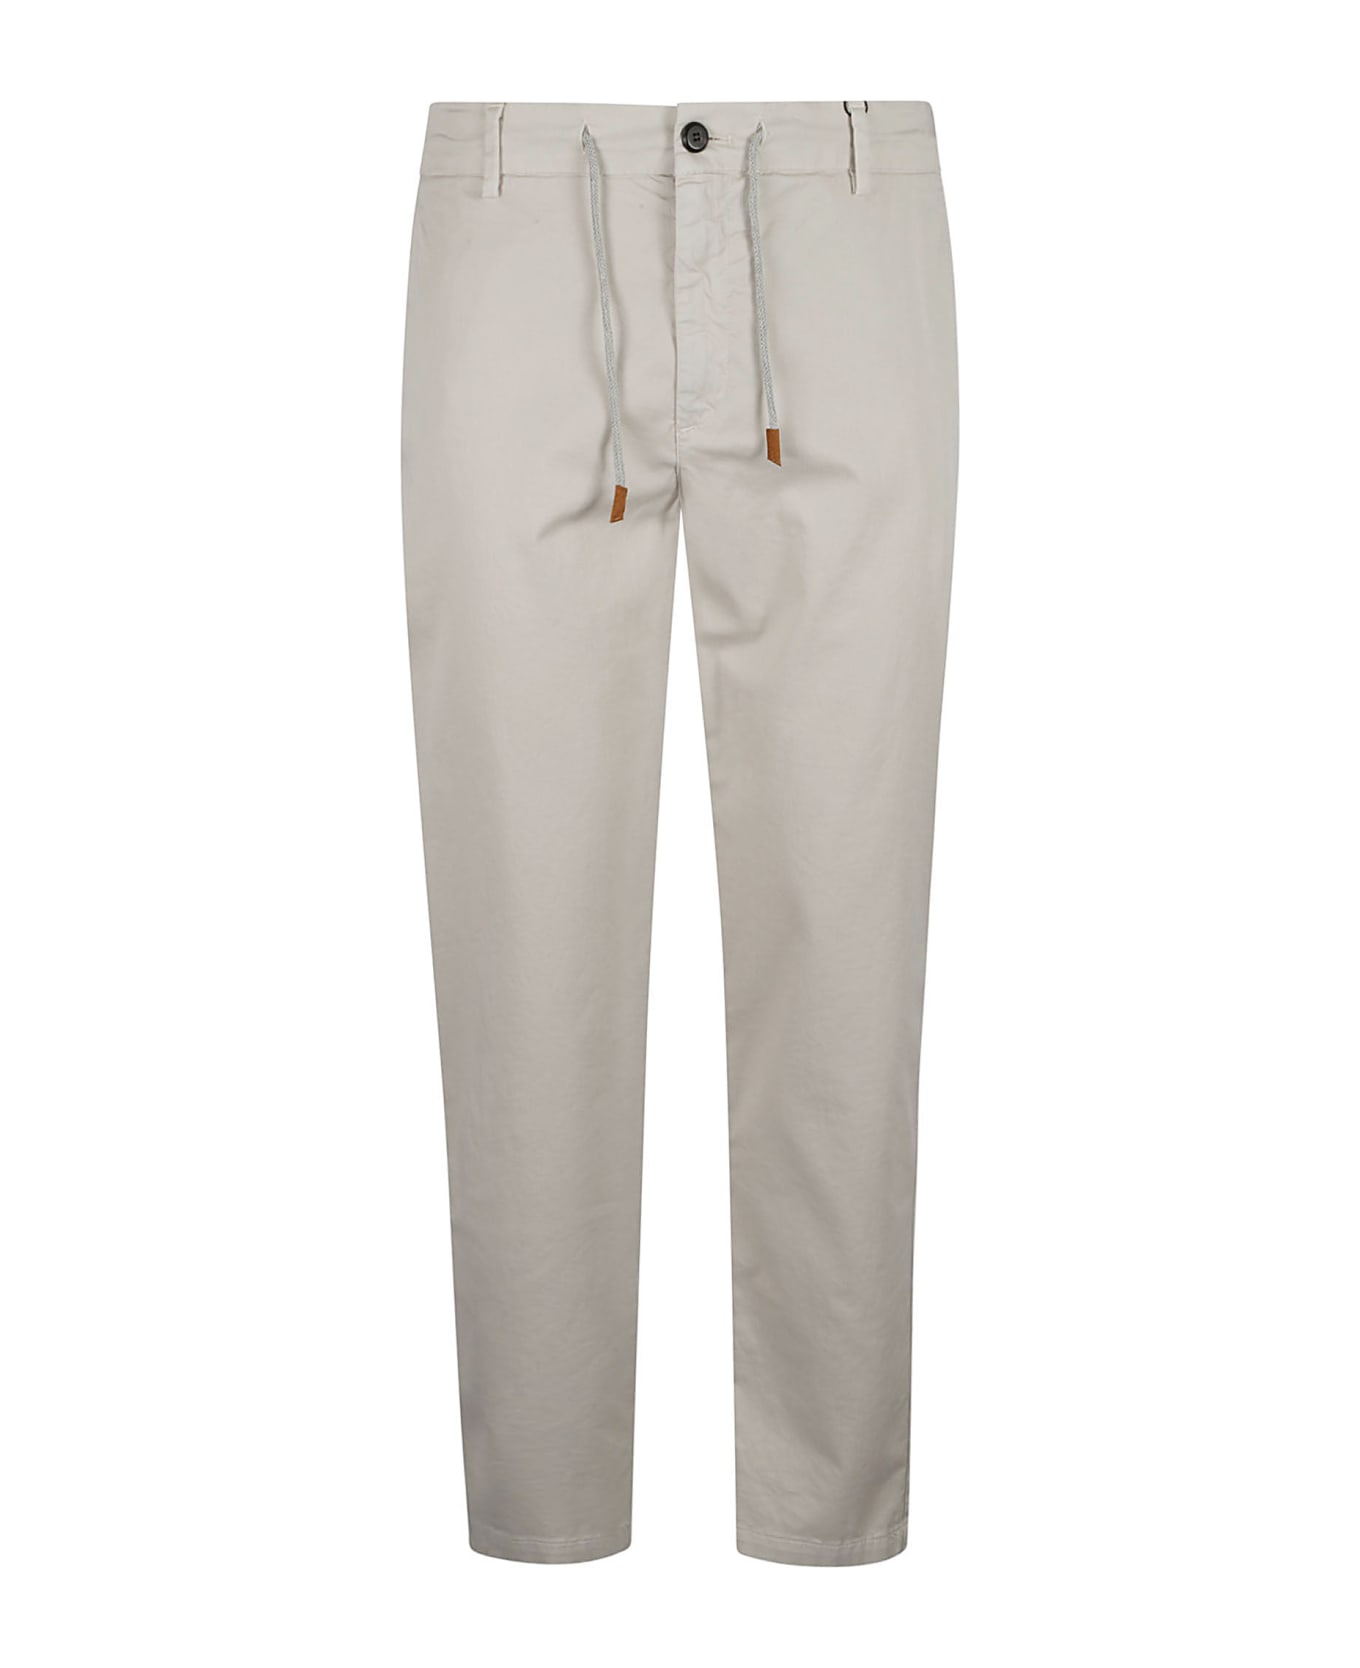 Eleventy Drawstringed Buttoned Trousers - Sand ボトムス